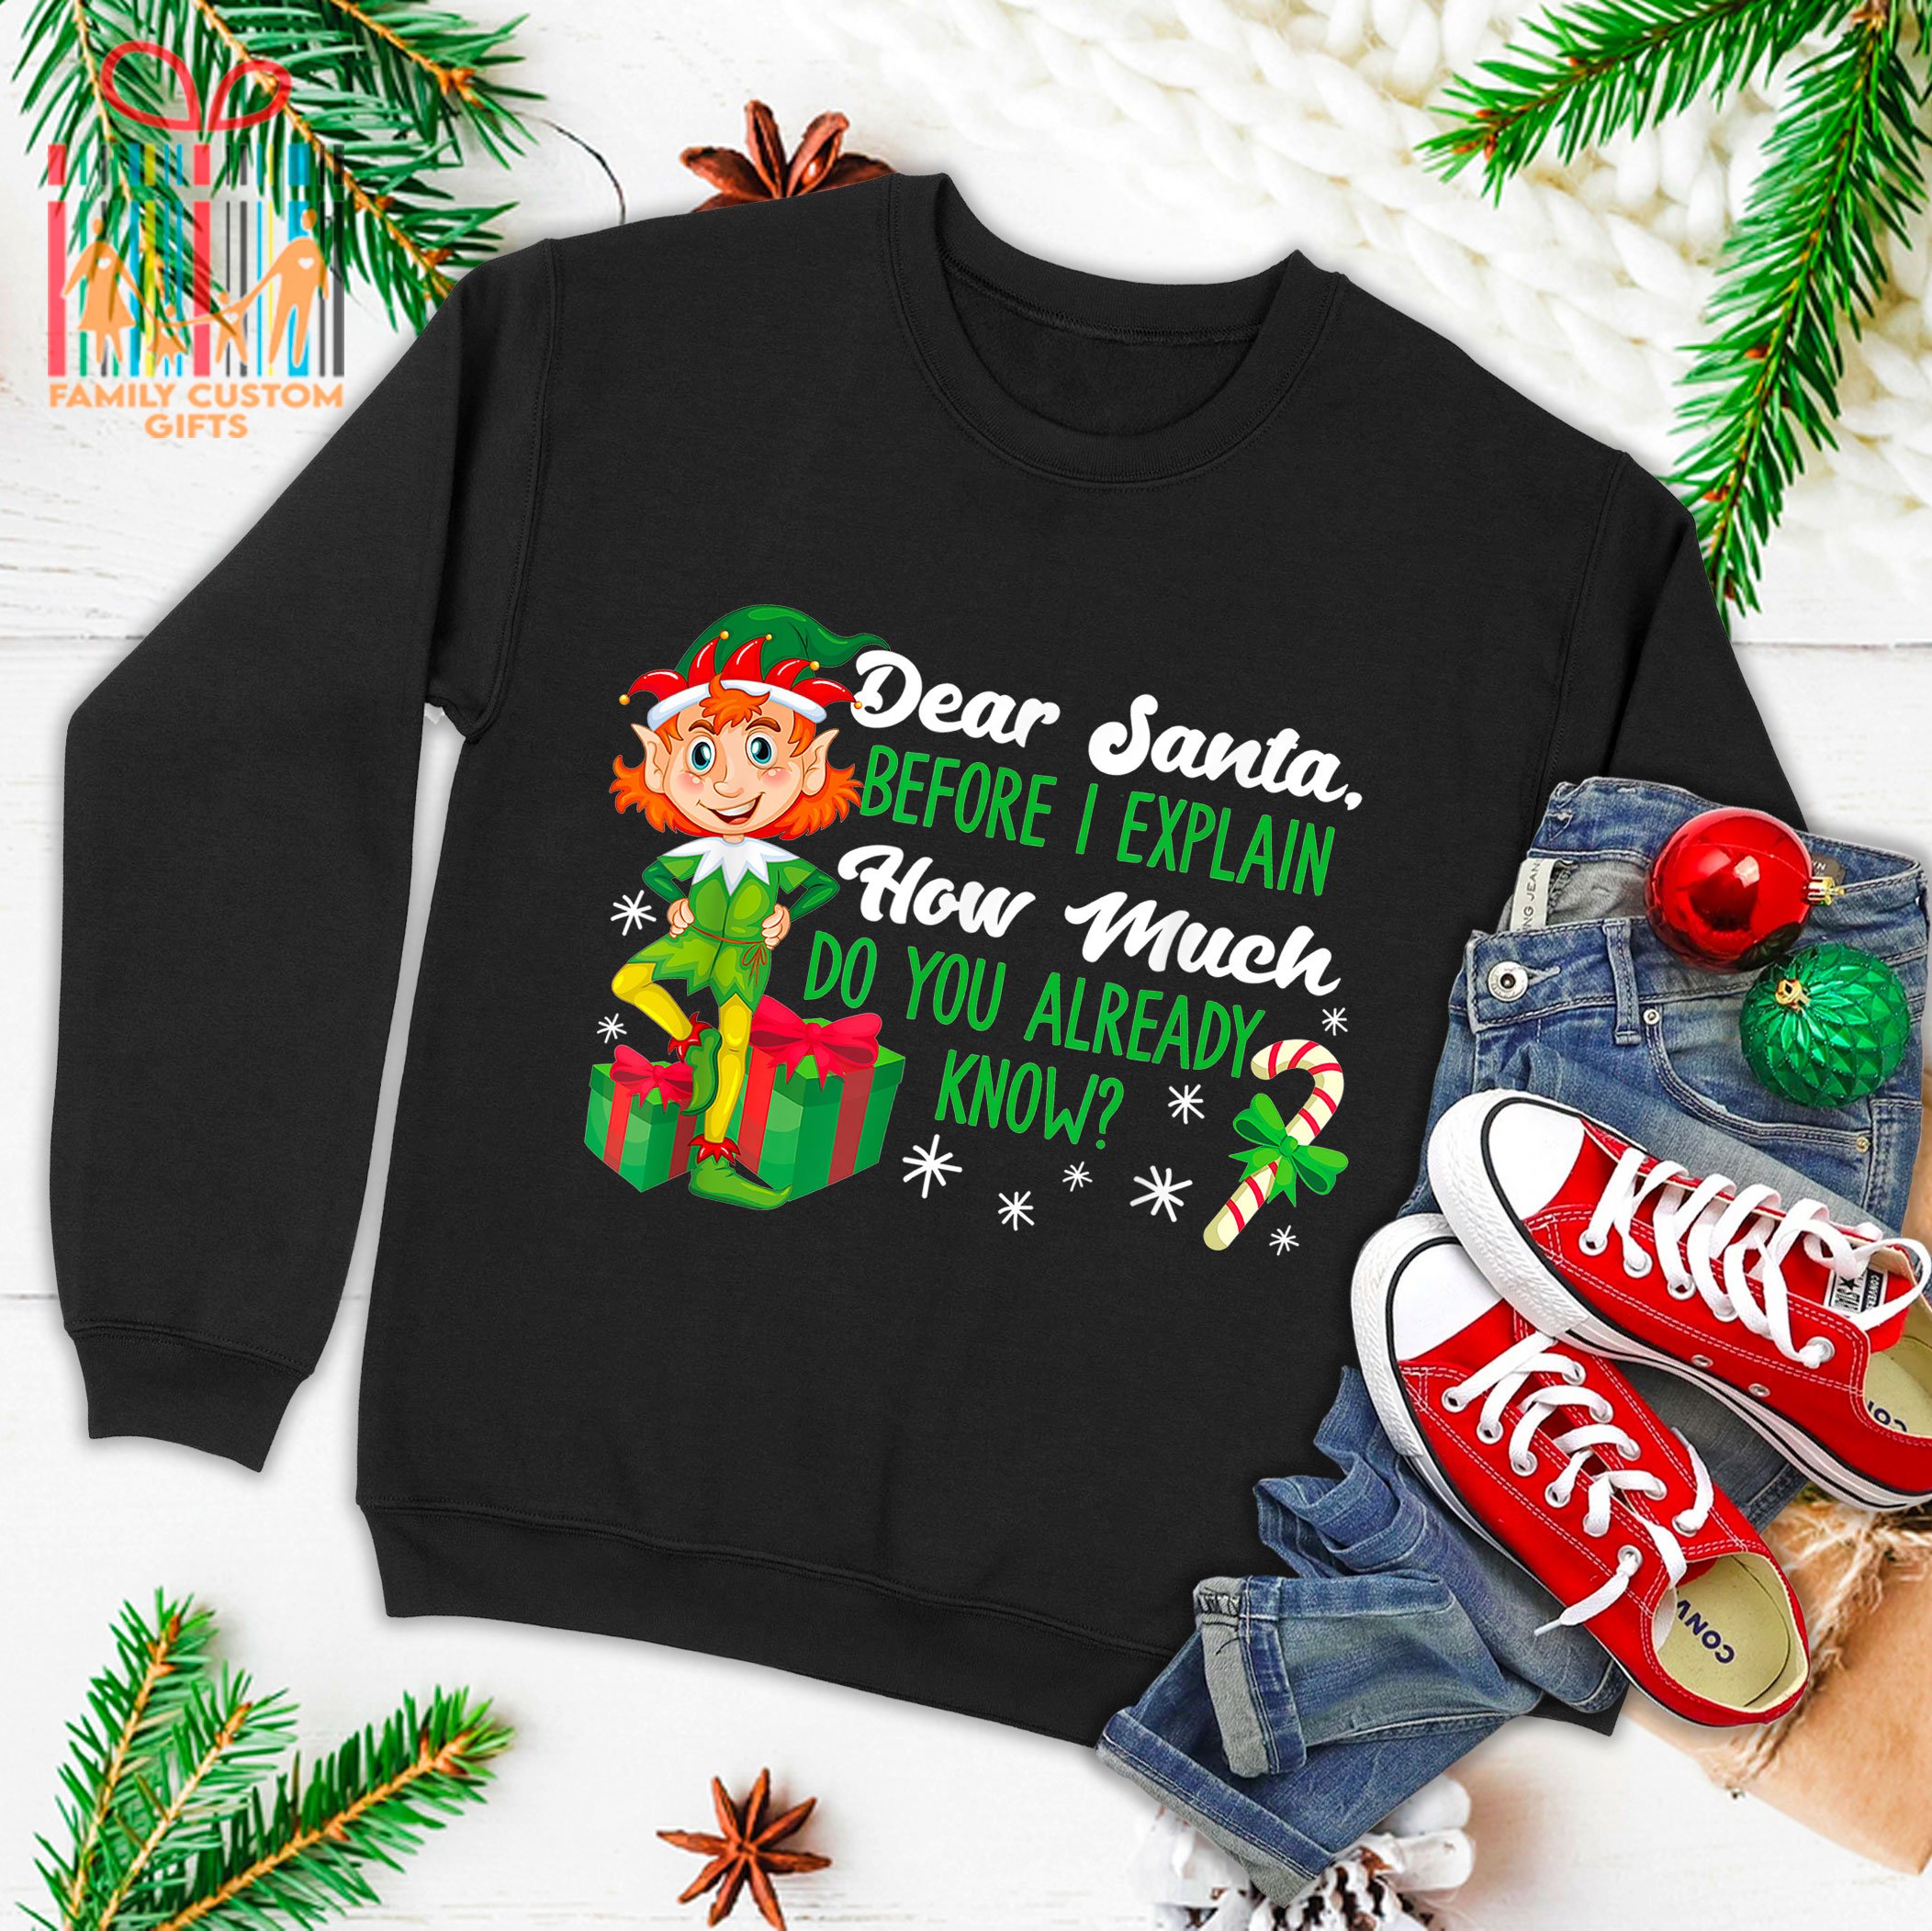 Funny Christmas Dear Santa How Much Do You Know Ugly Christmas Sweater T Shirt